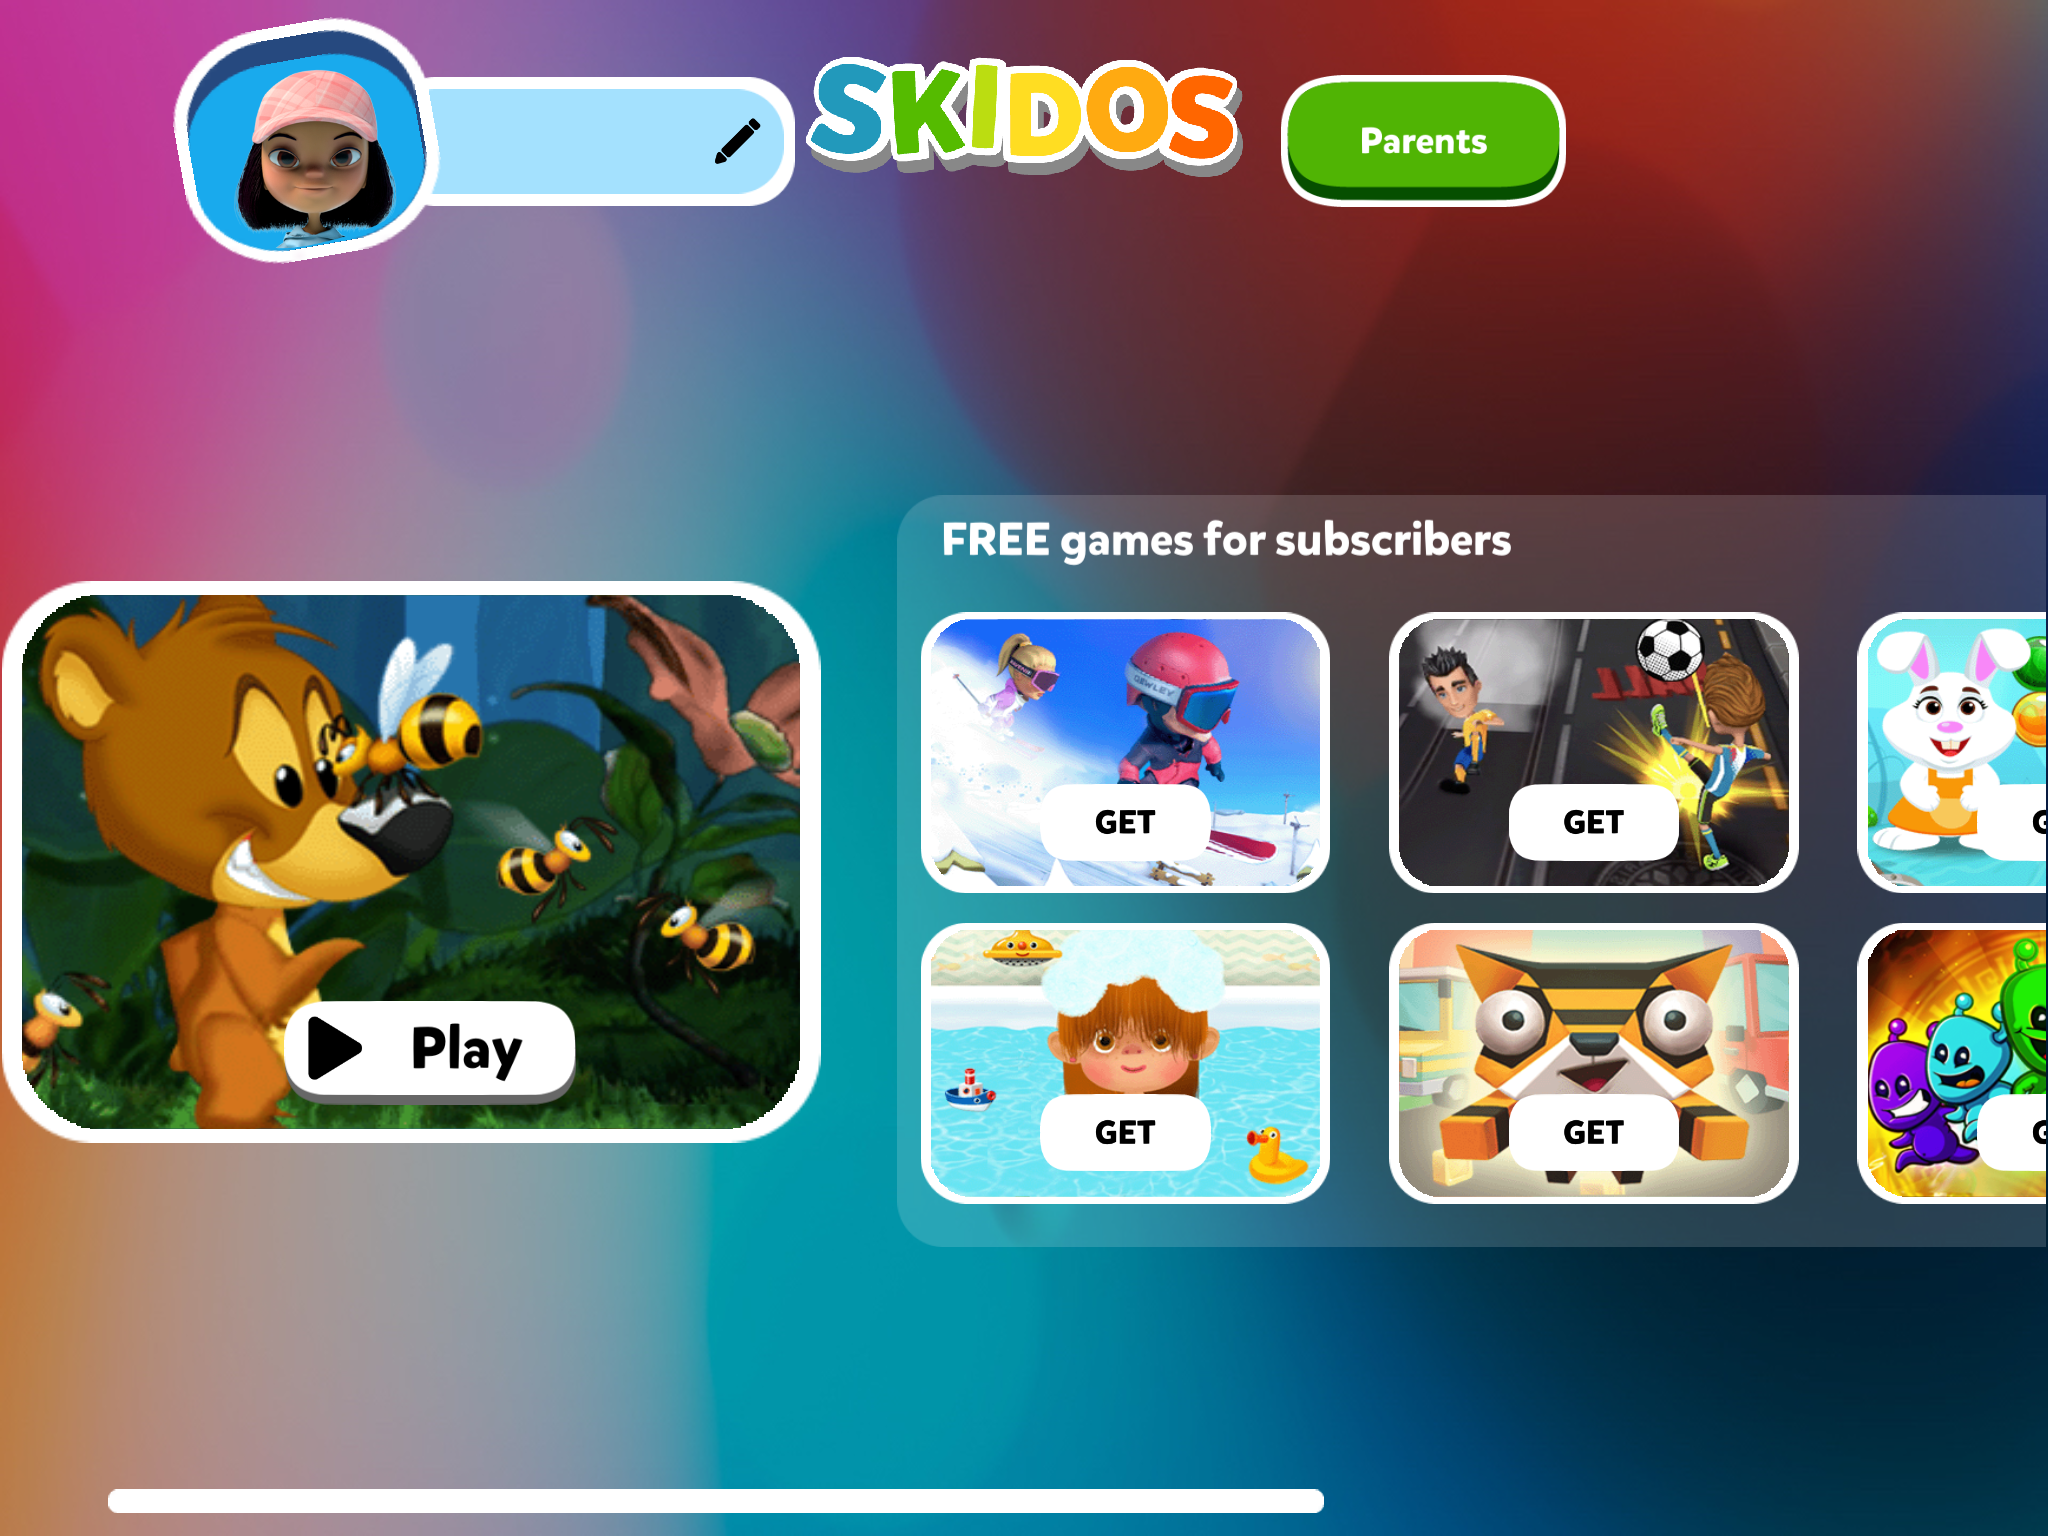 SKIDOS Kids Learning Games got a new look in 2020